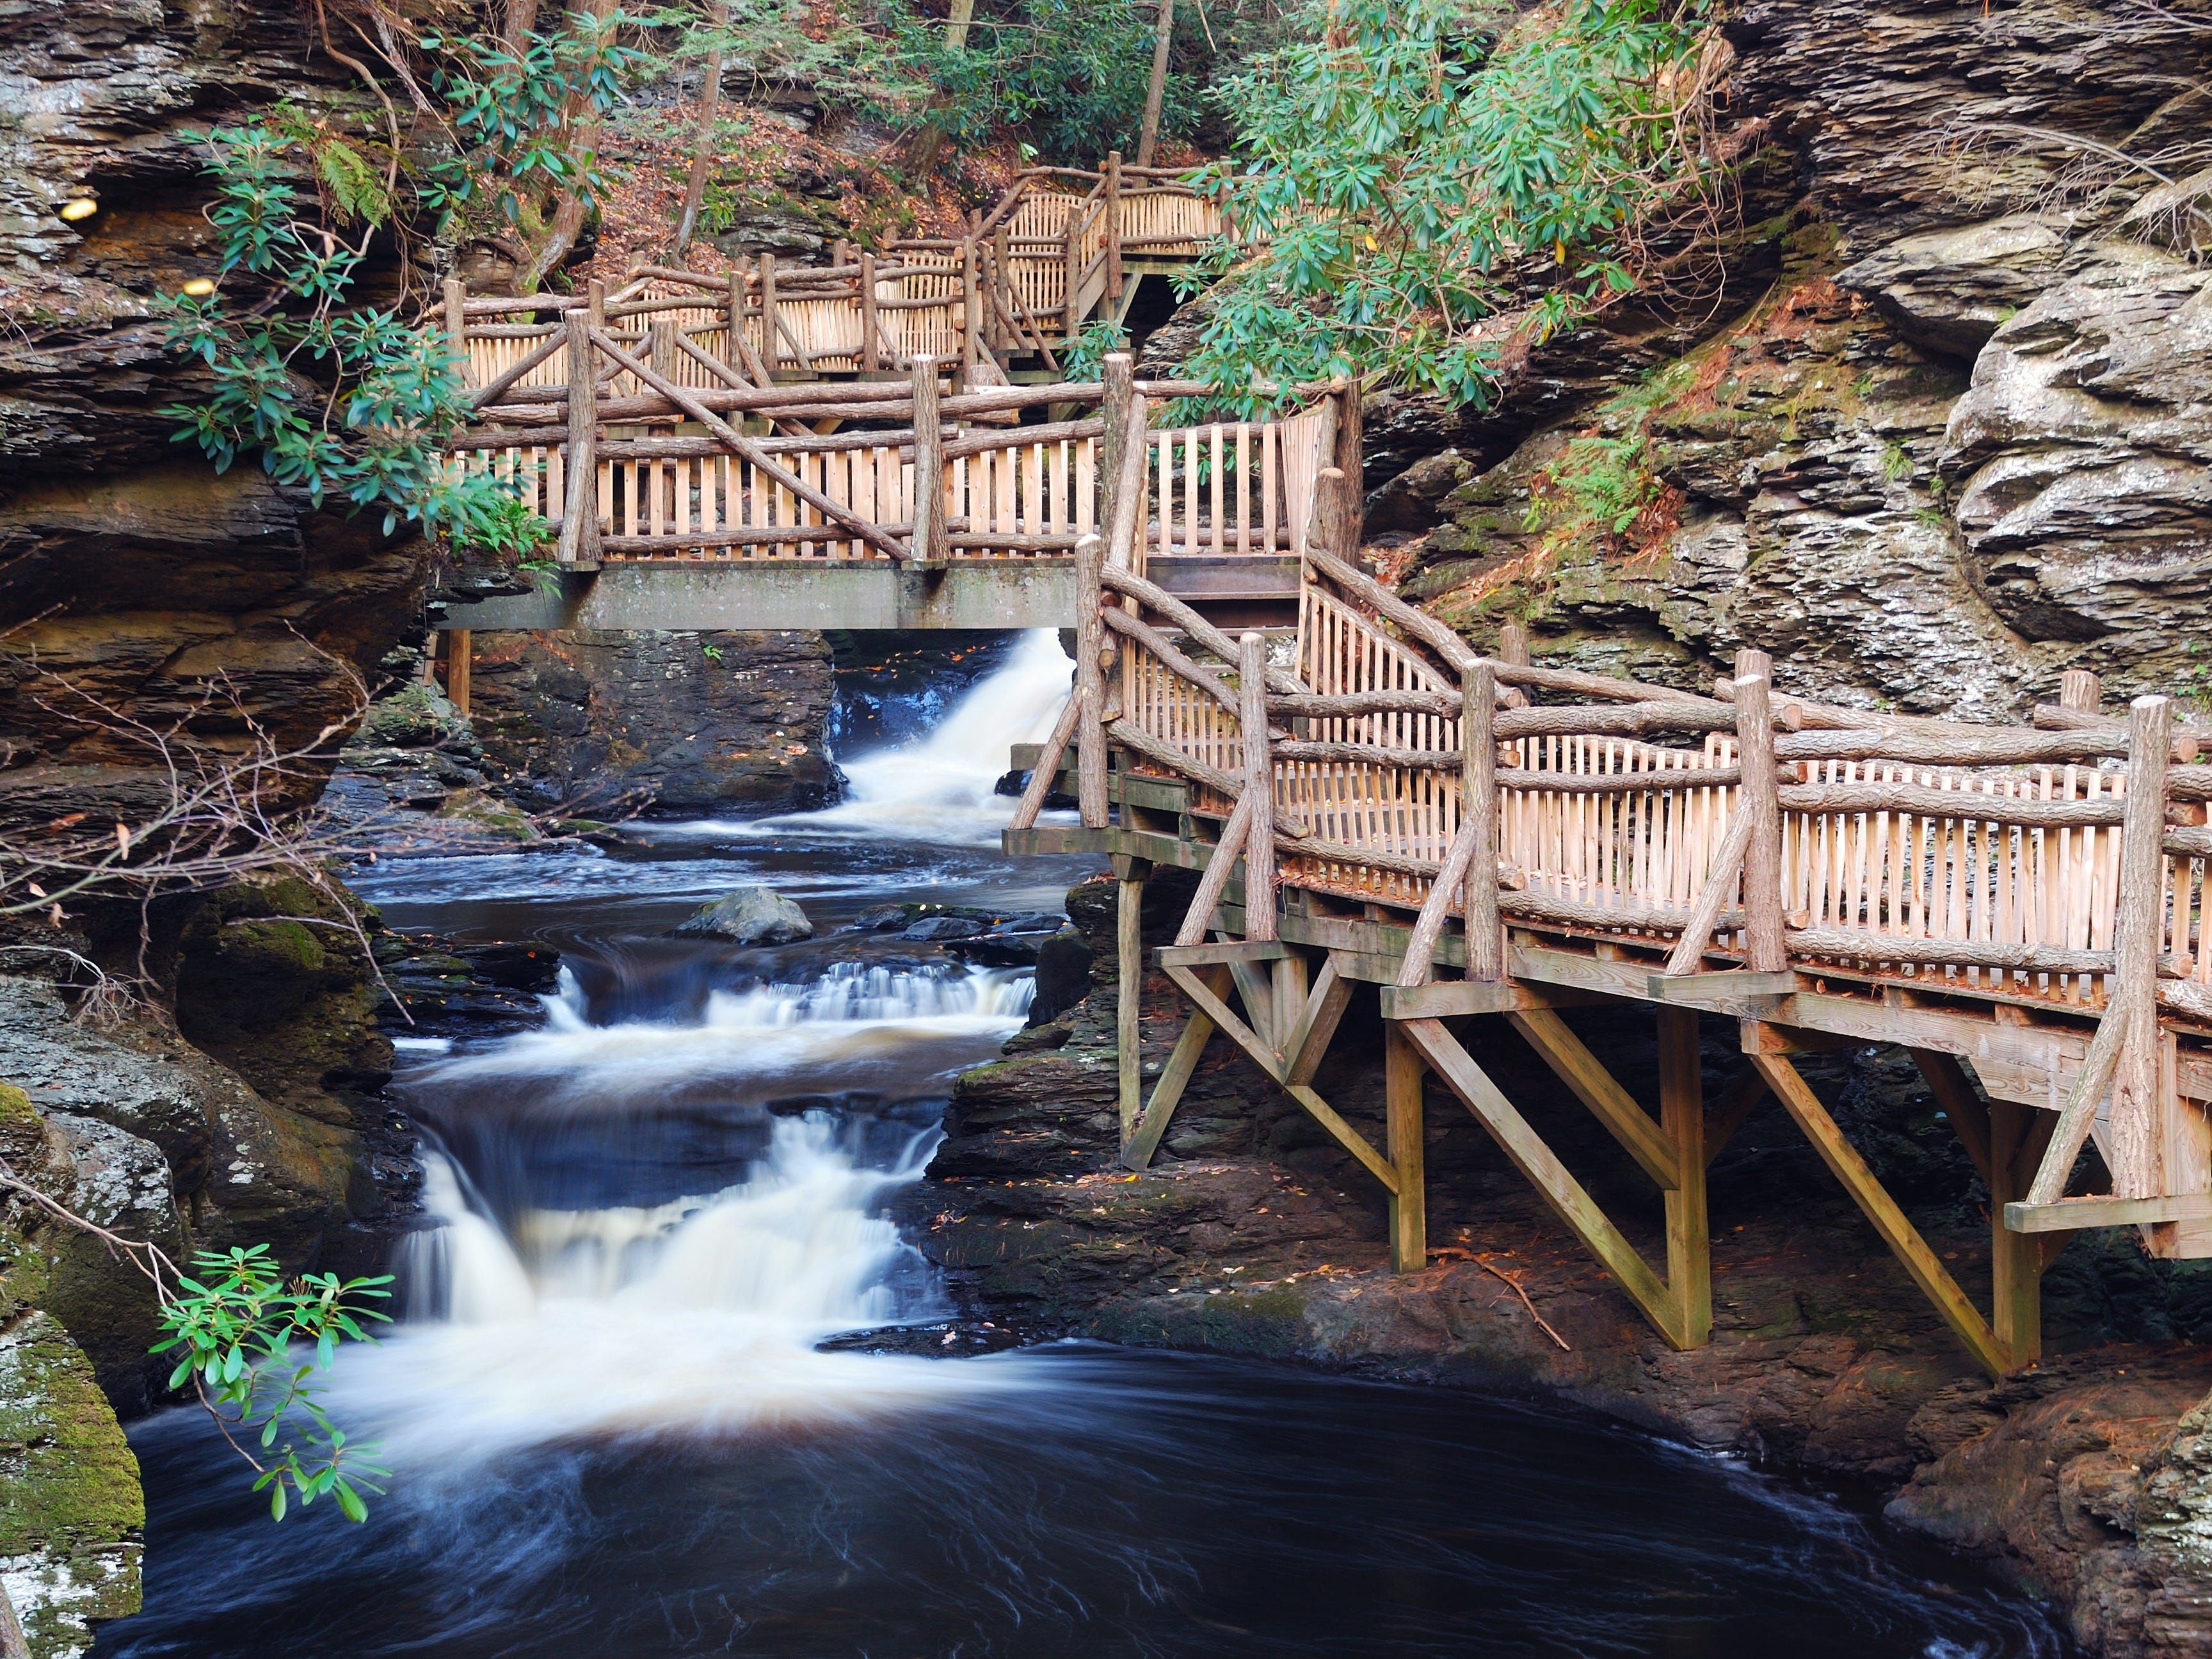 <p>You'll find a few trails within the park which vary in difficulty. Hikers of all levels will love the <a href="https://www.alltrails.com/trail/us/pennsylvania/bushkill-falls-red-trail">Red Trail</a> to Bridal Veils Falls.</p><p>The 1.4-mile loop features a waterfall and plenty of lively flora. </p><p>Because it's nestled in the woods of <a href="https://www.poconomountains.com/">the Poconos</a>, there are plenty of things to do near the trail as well.</p>